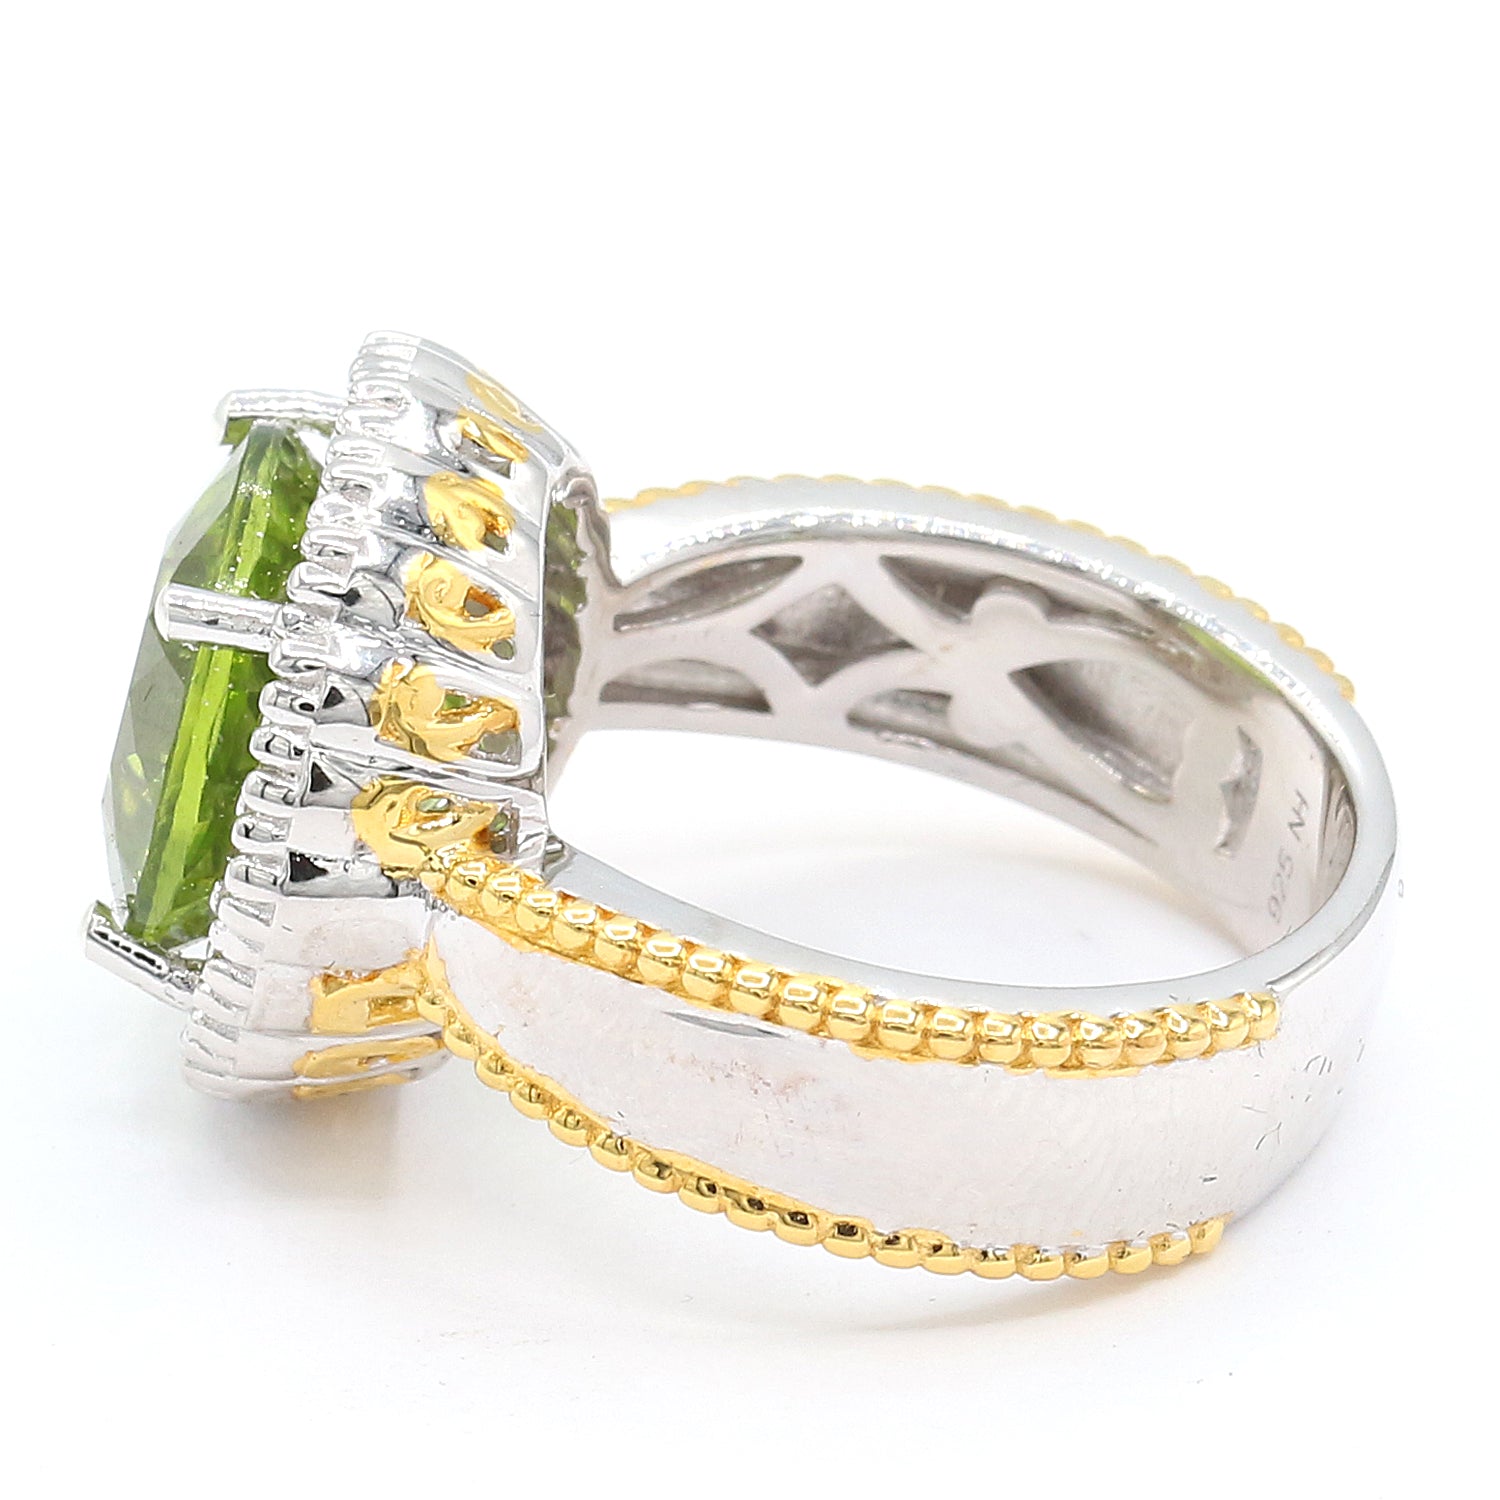 Gems en Vogue One-of-a-kind 6.77ctw Peridot & White Zircon Halo Ring